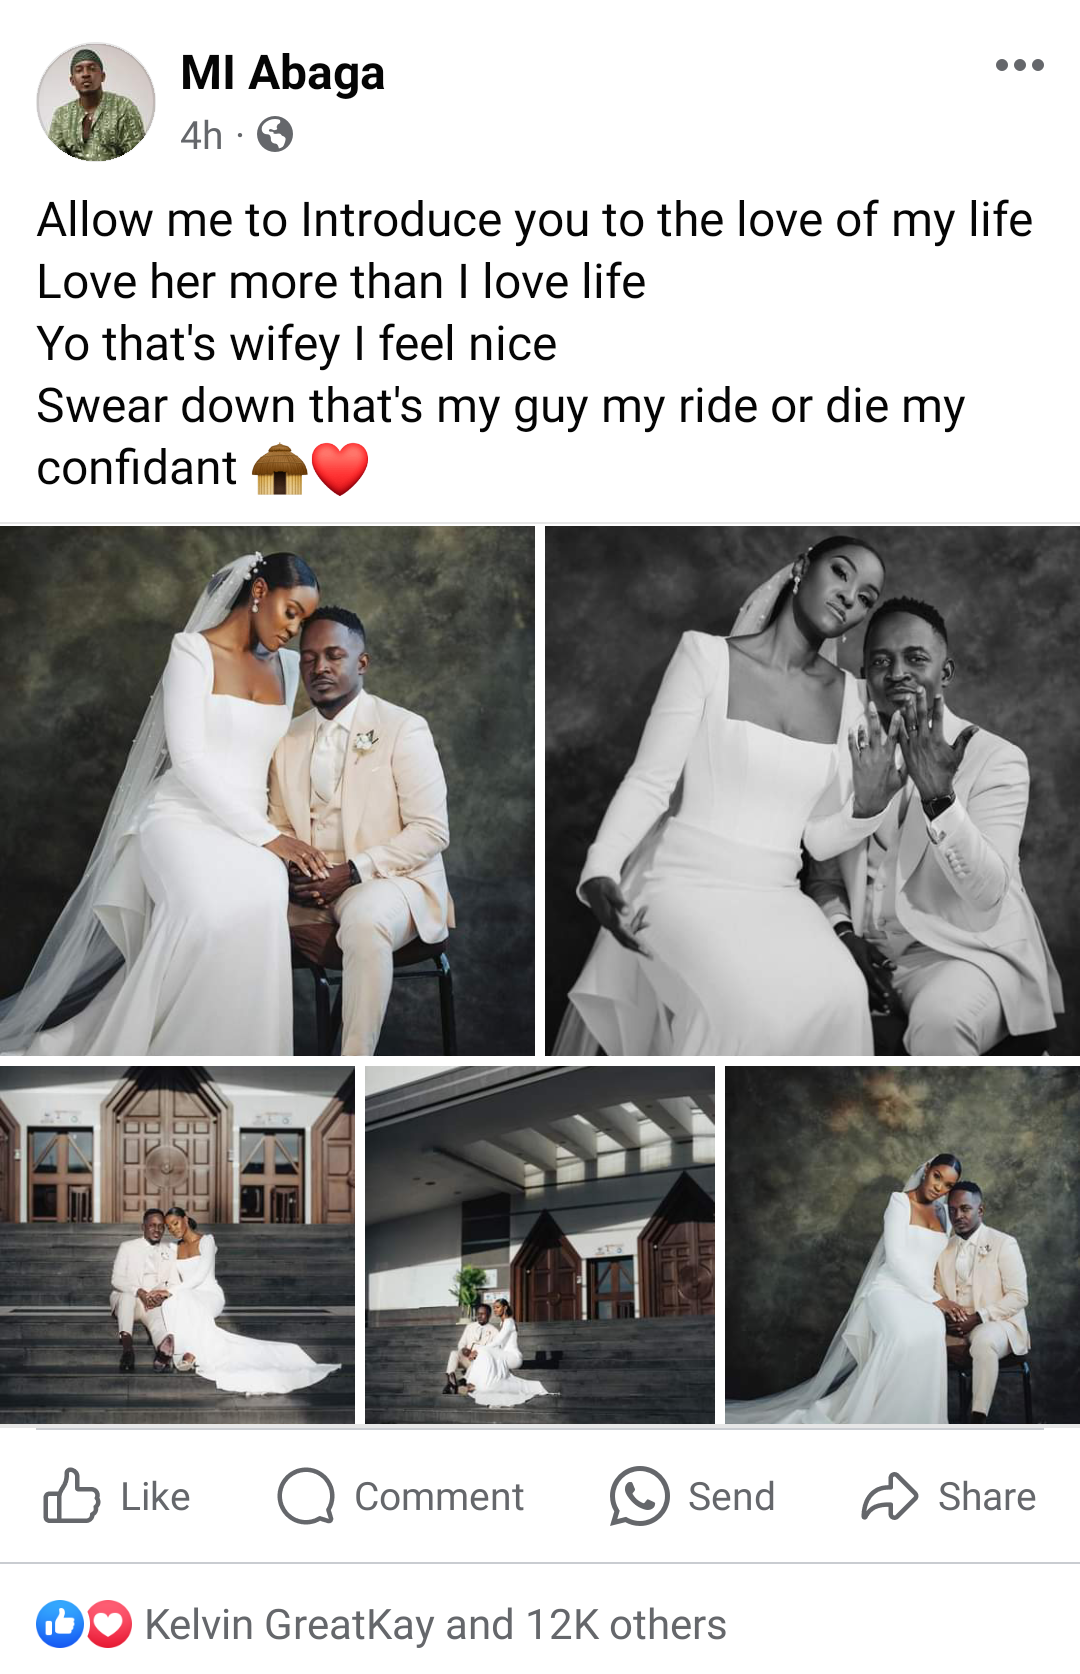 "Allow me to Introduce you to the love of my life" - MI Abaga says as he shares photos from his wedding